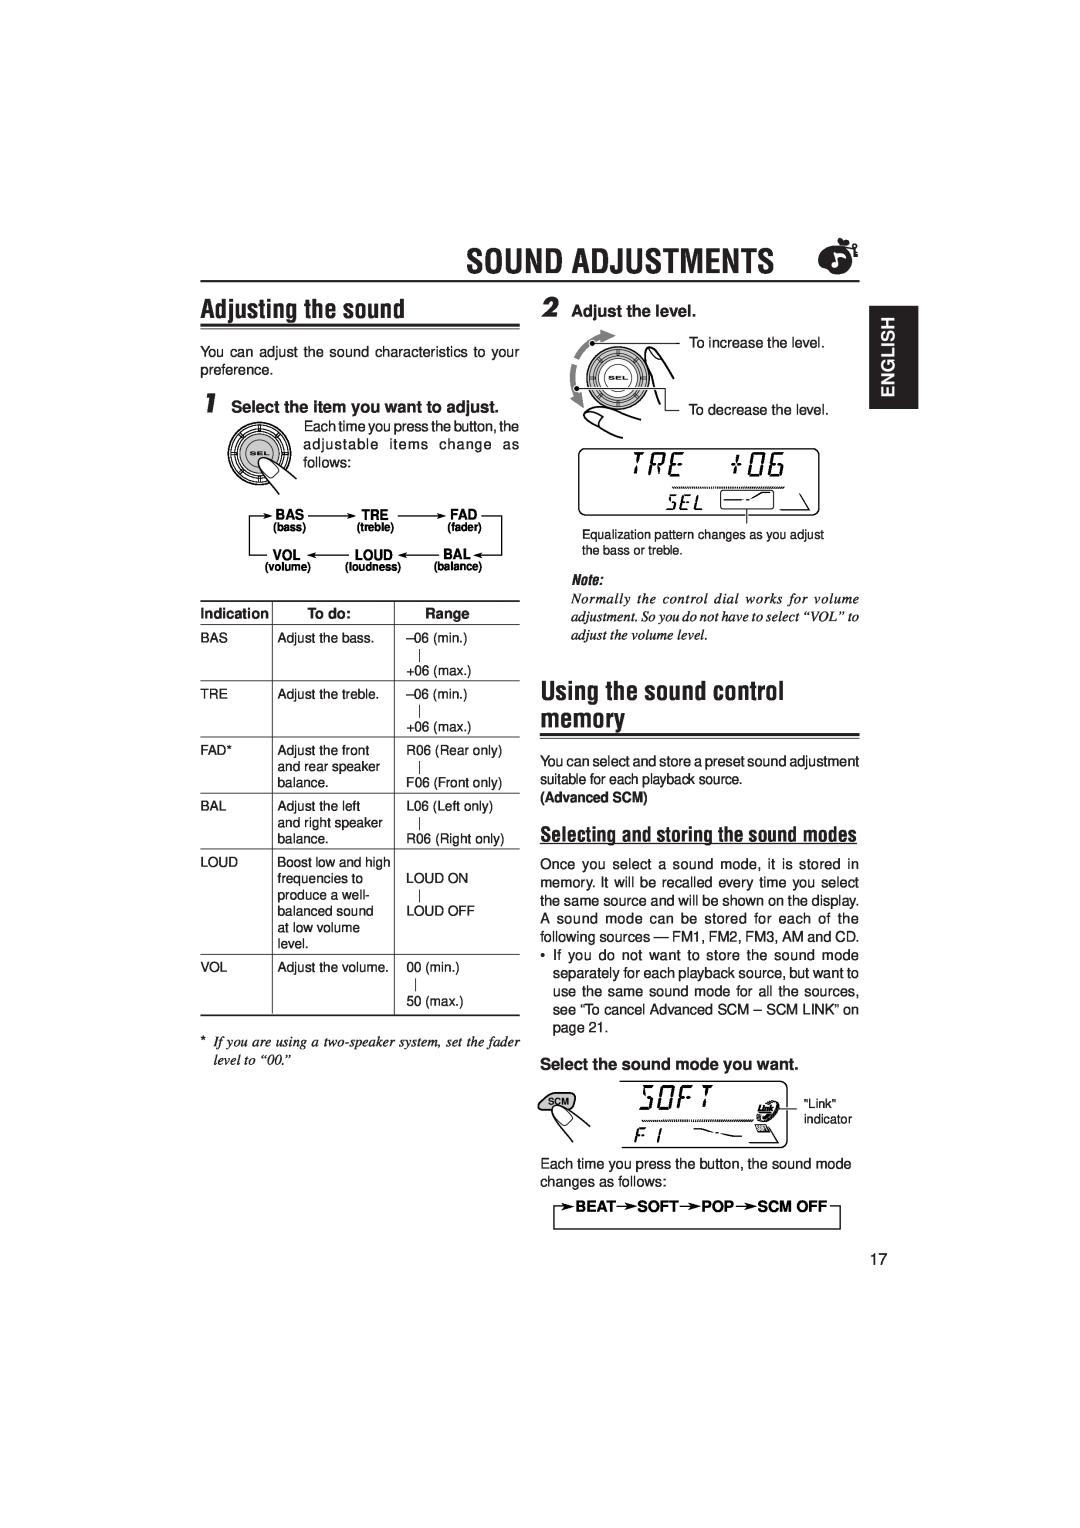 JVC KD-S9R Sound Adjustments, Adjusting the sound, Using the sound control memory, Selecting and storing the sound modes 